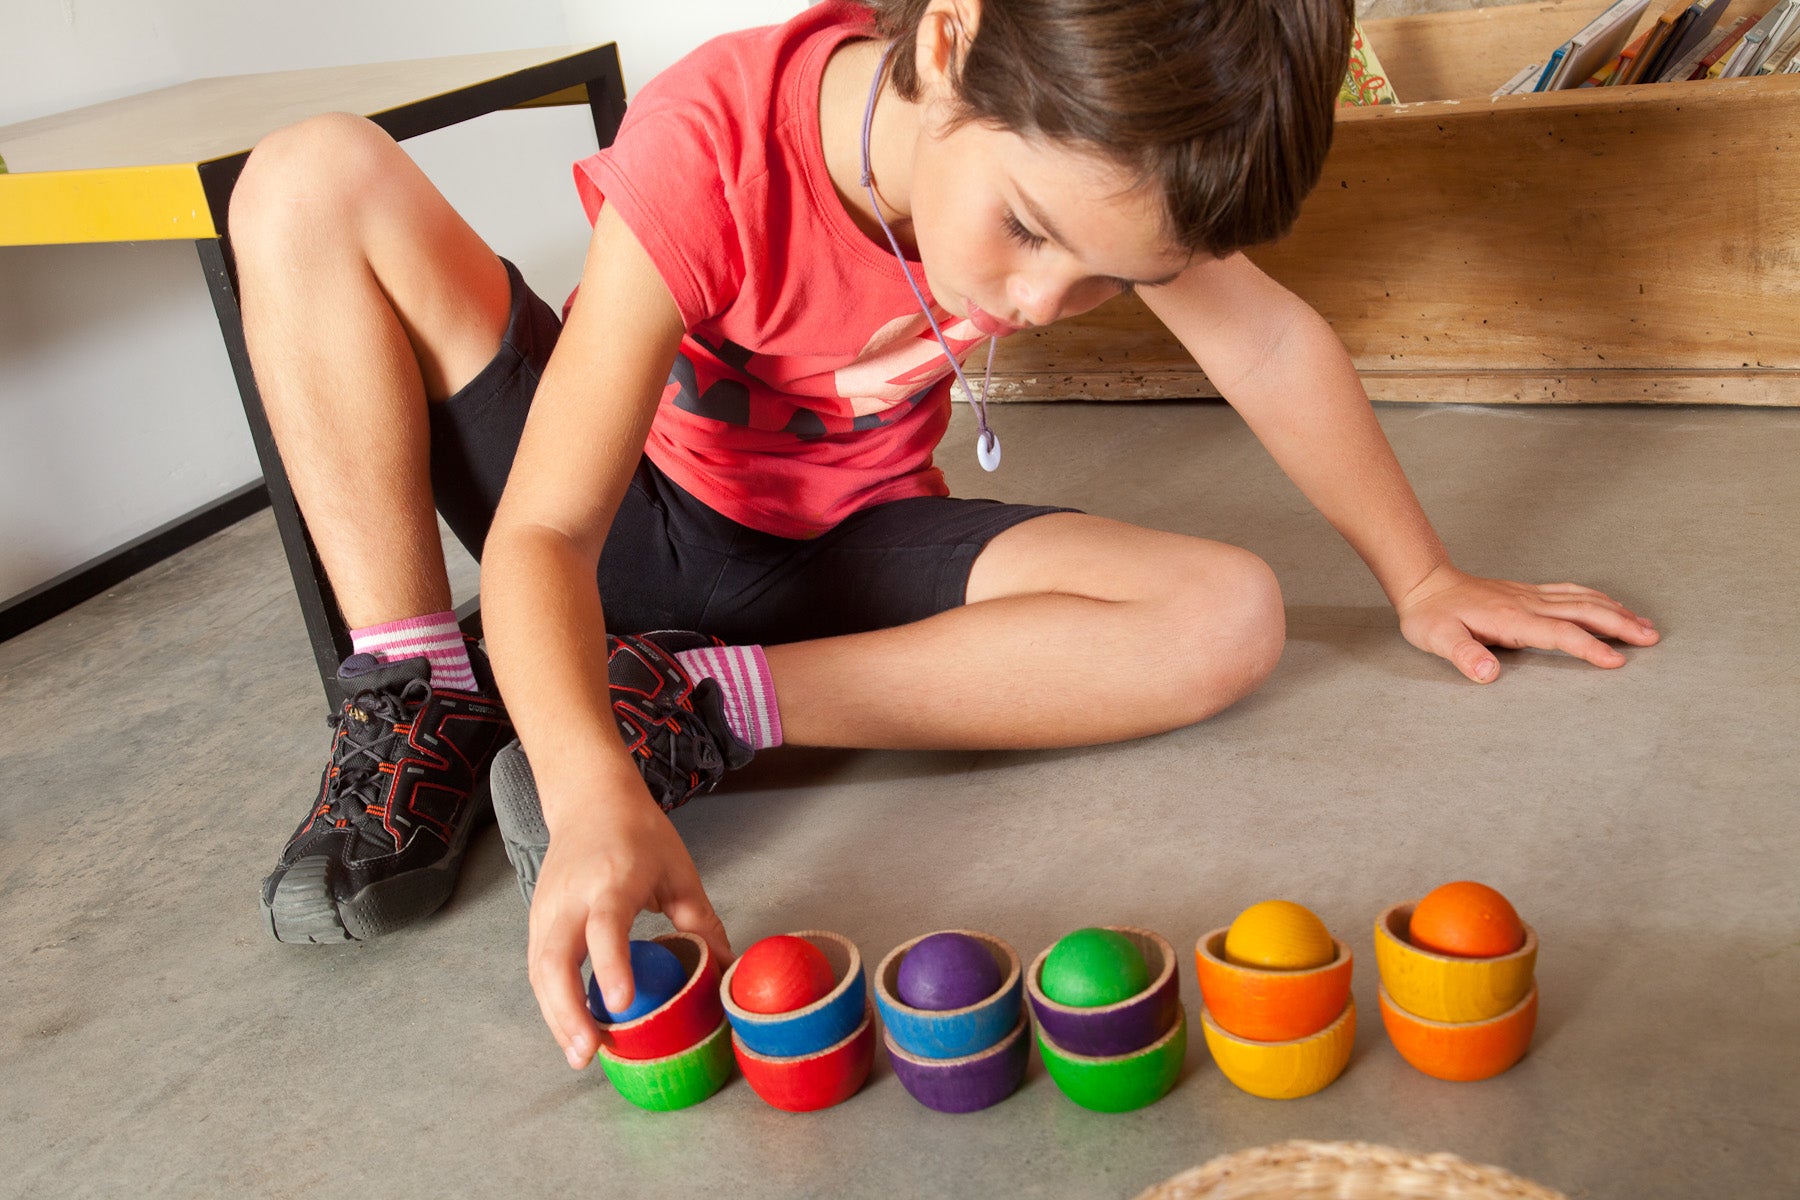 Child playing with rainbow bowls and balls